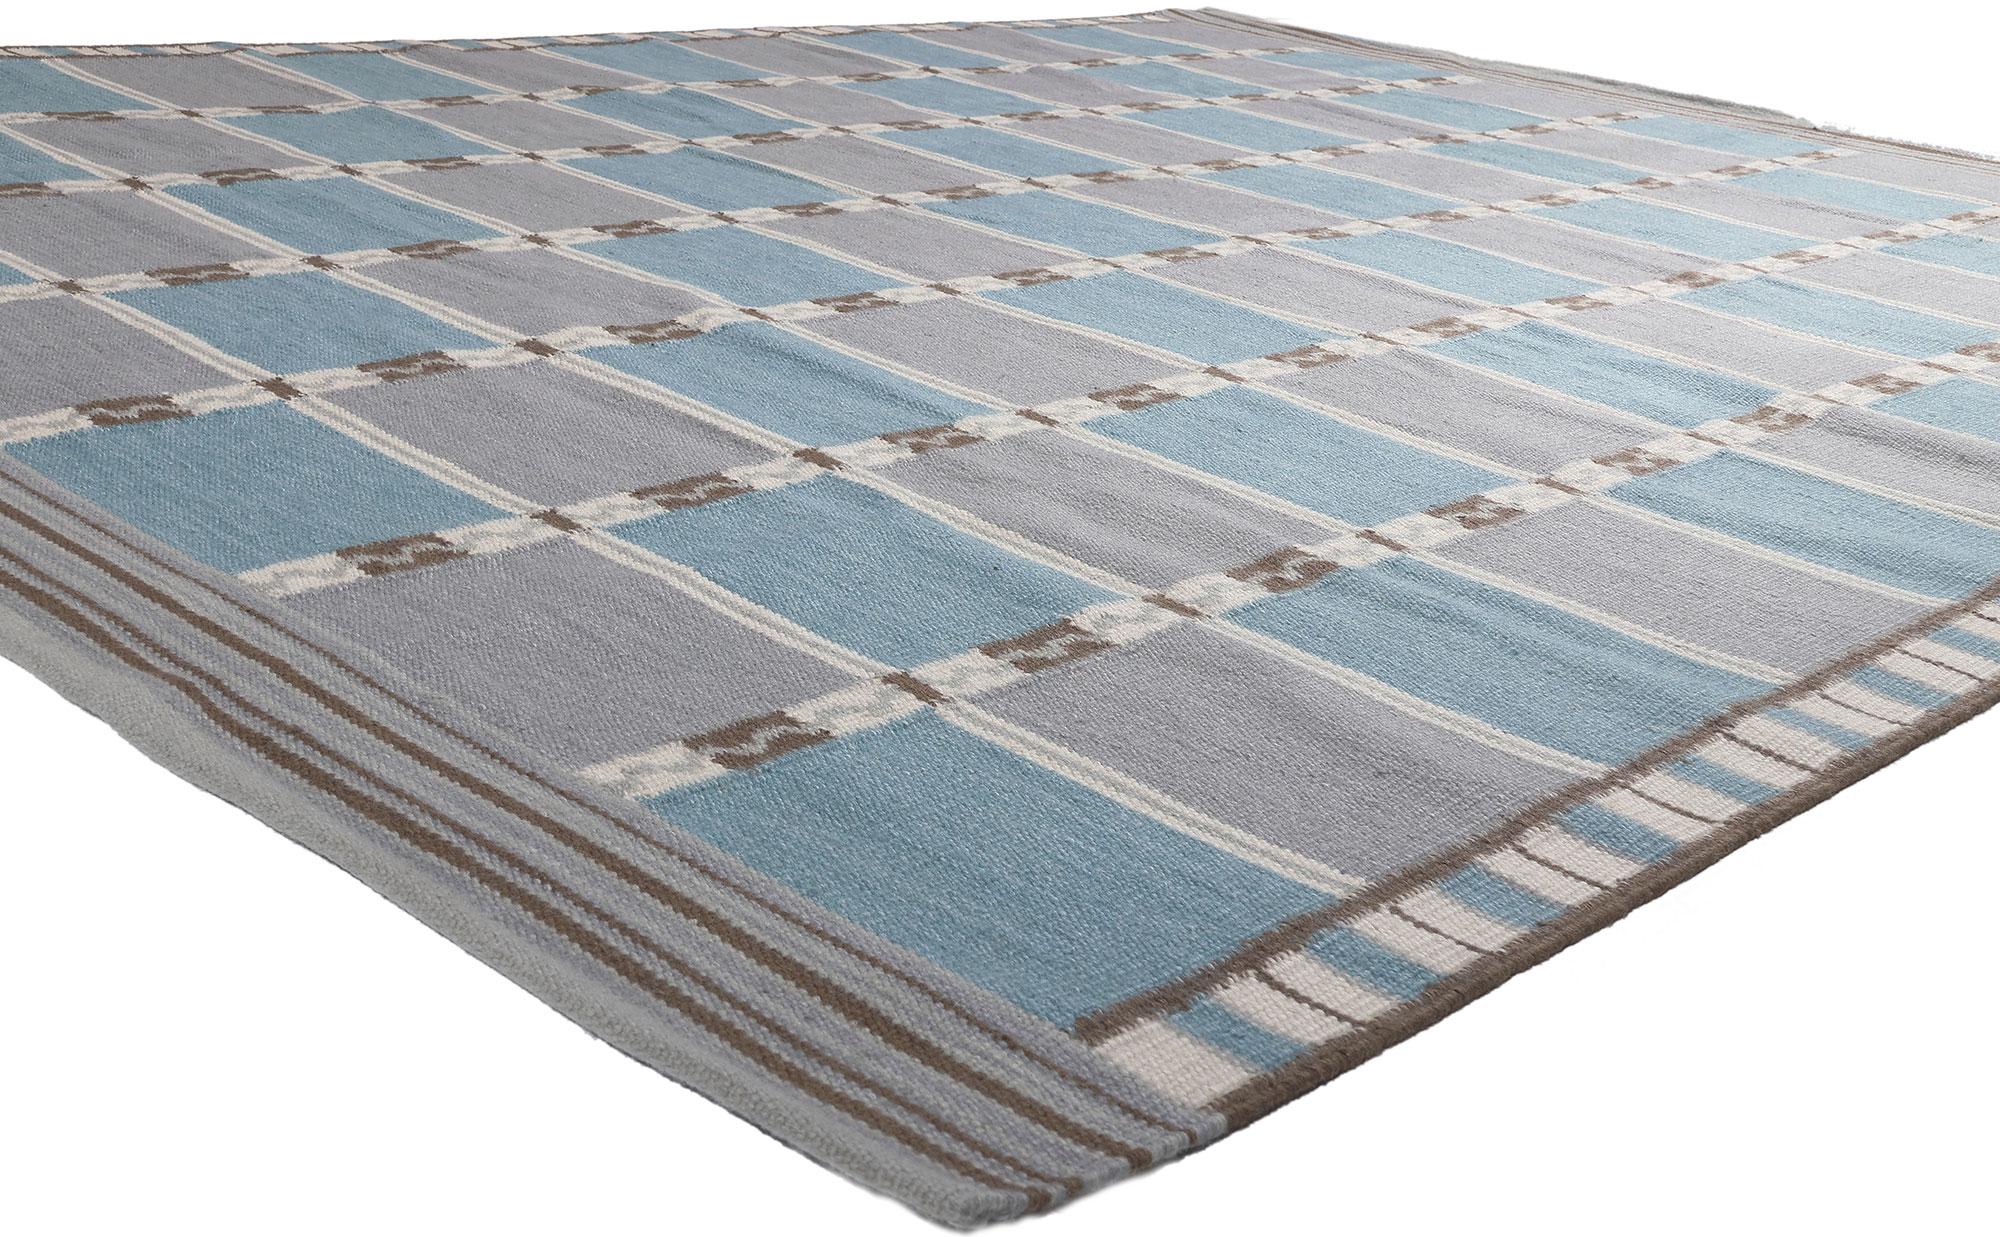 30936 New Swedish Inspired Kilim Rug, 09'02 x 12'00.
Displaying simplicity with incredible detail and texture, this handwoven wool Swedish inspired Kilim rug provides a feeling of cozy contentment without the clutter. The eye-catching checked design